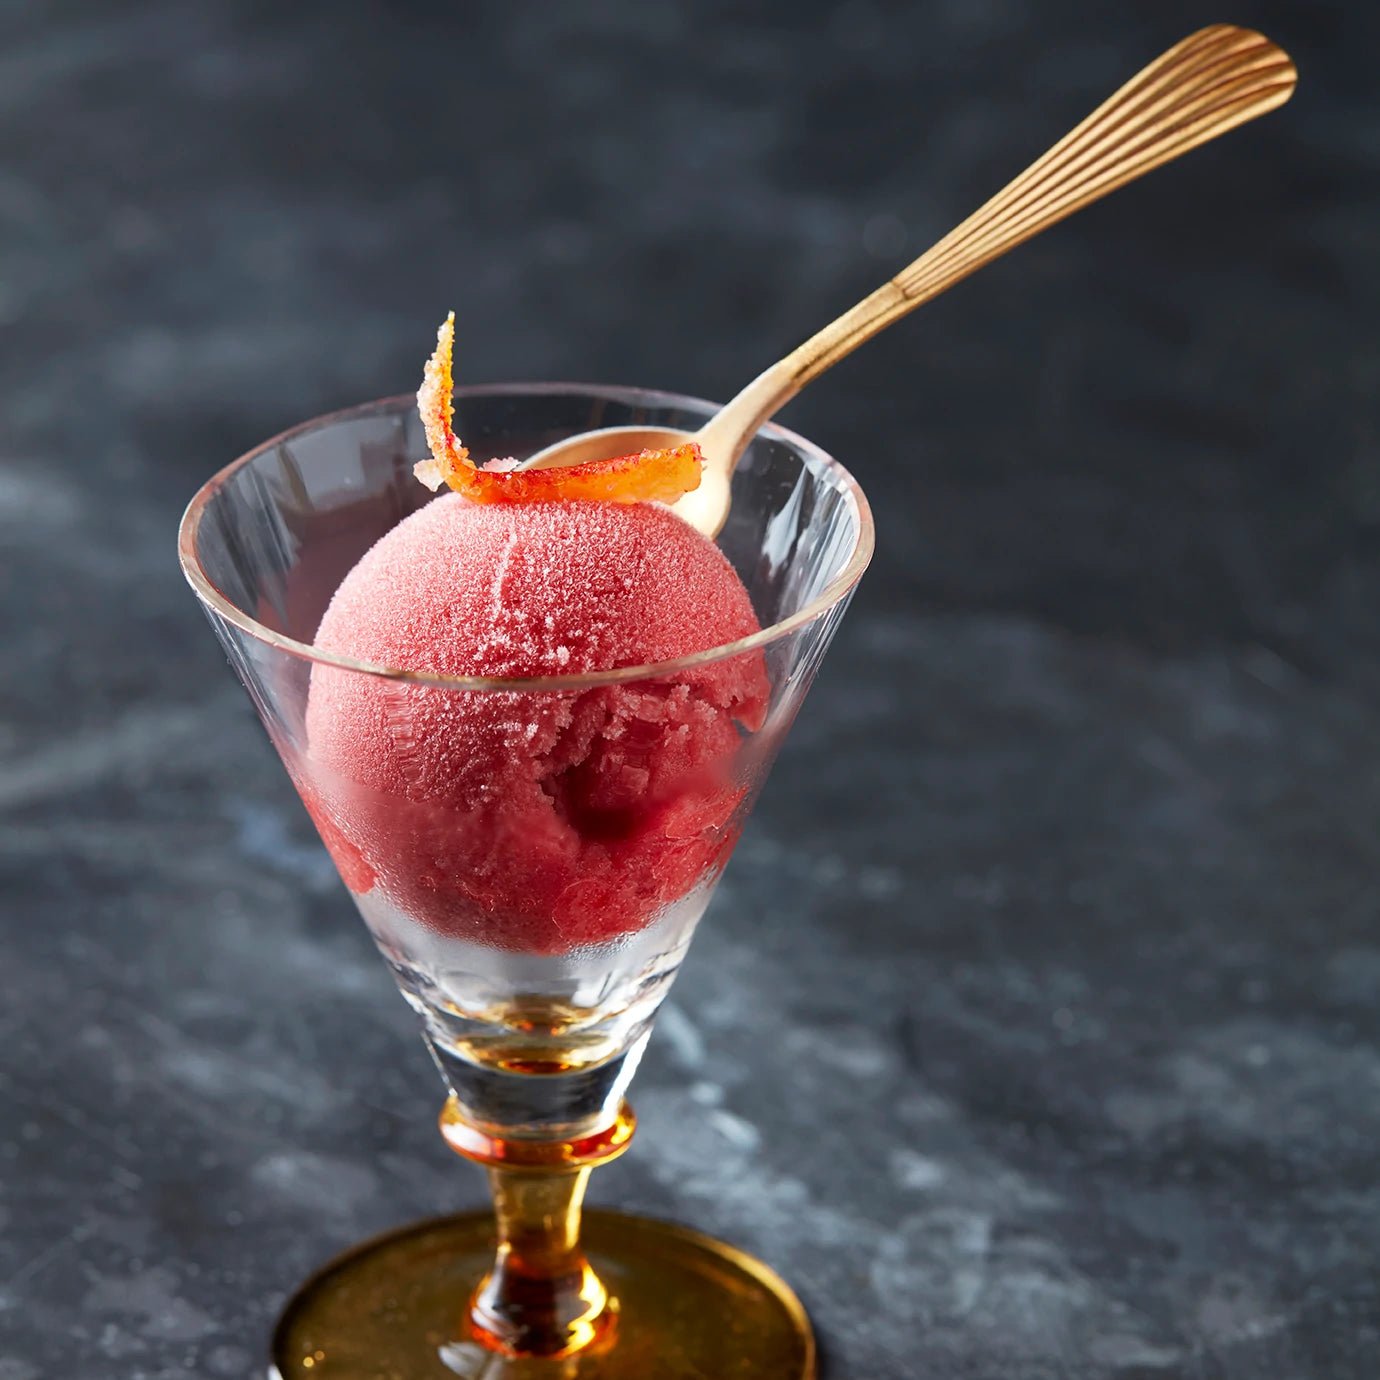 Scoop of Blood Orange &amp; Campari sorbet in a glass with a golden spoon